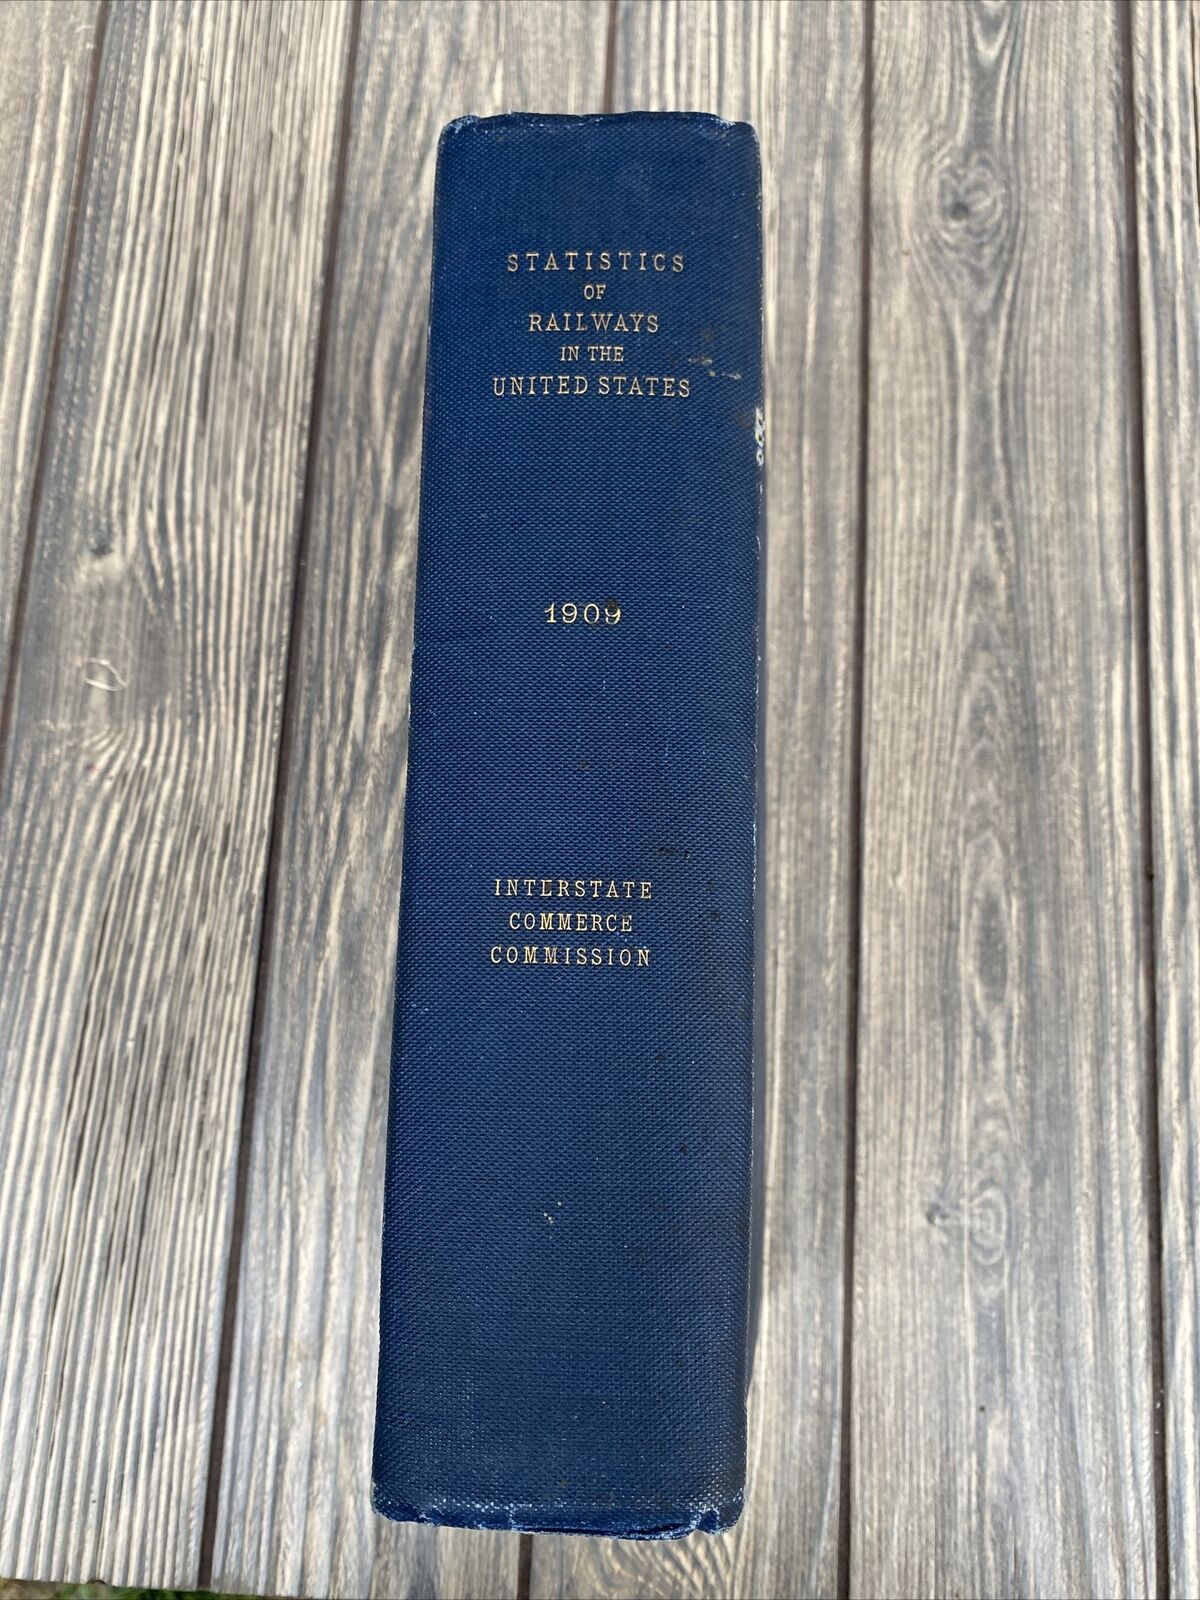 Statistics Of Railways In The United States 1909 Interstate Commerce Commission 